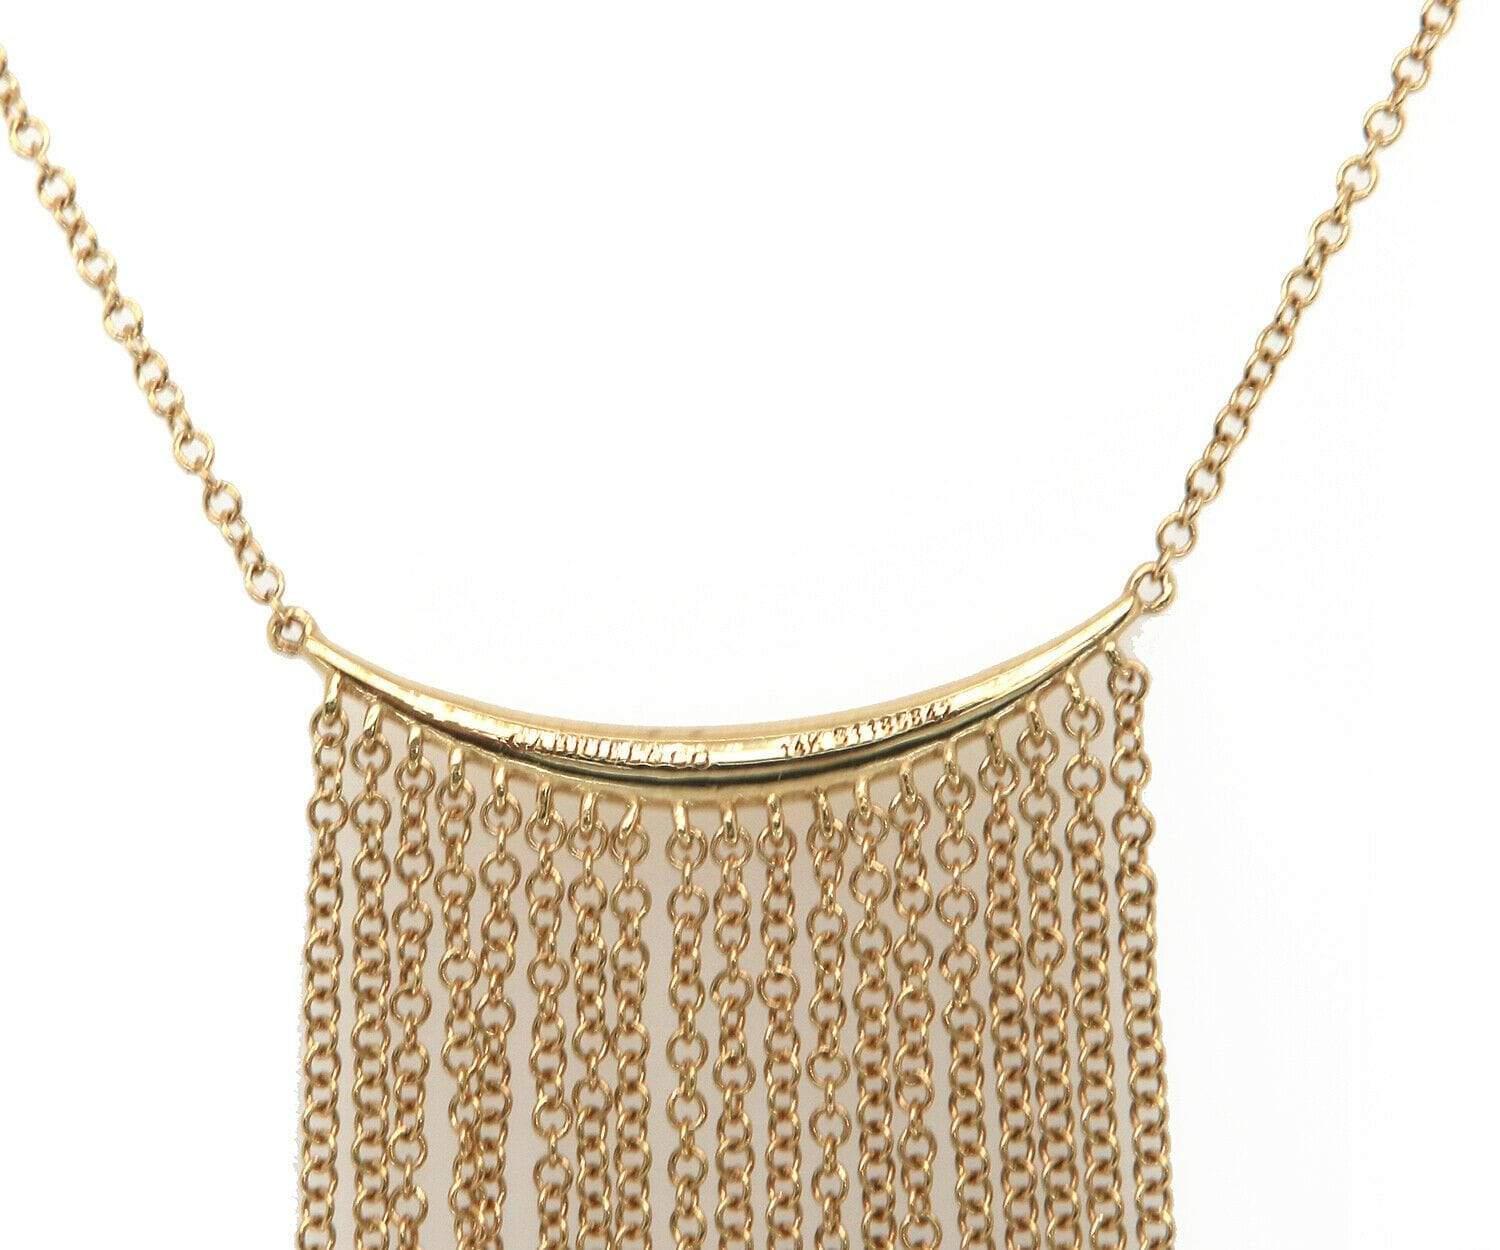 Round Cut New Gabriel & Co. Curved Bar Multi Strand Fringe Necklace in 14K Yellow Gold For Sale